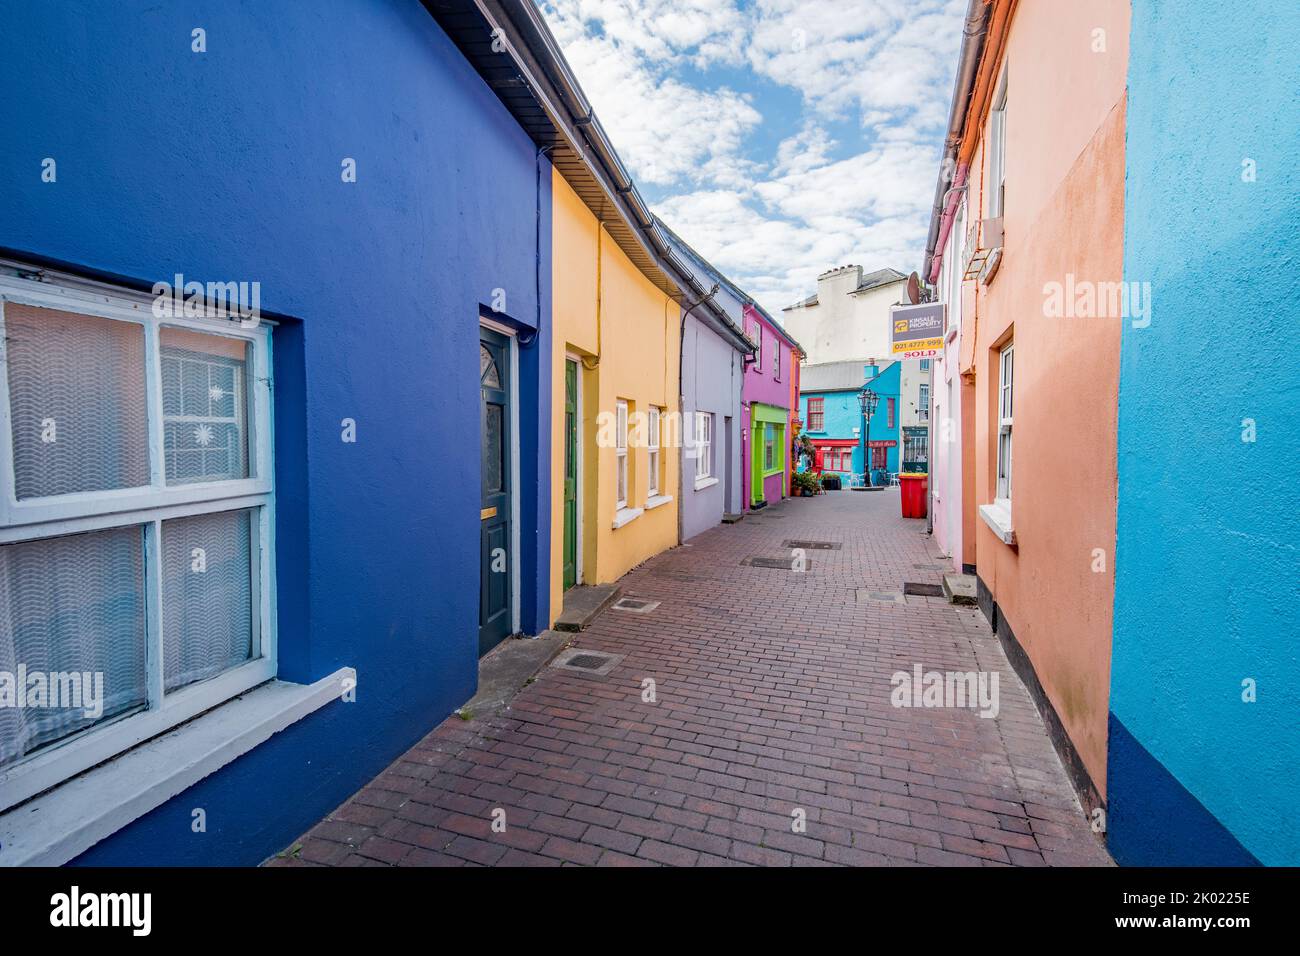 Brightly coloured  painted properties in Kinsale, a historic port & fishing town  approx 25 km south of Cork City on the southeast coast of Ireland. Stock Photo